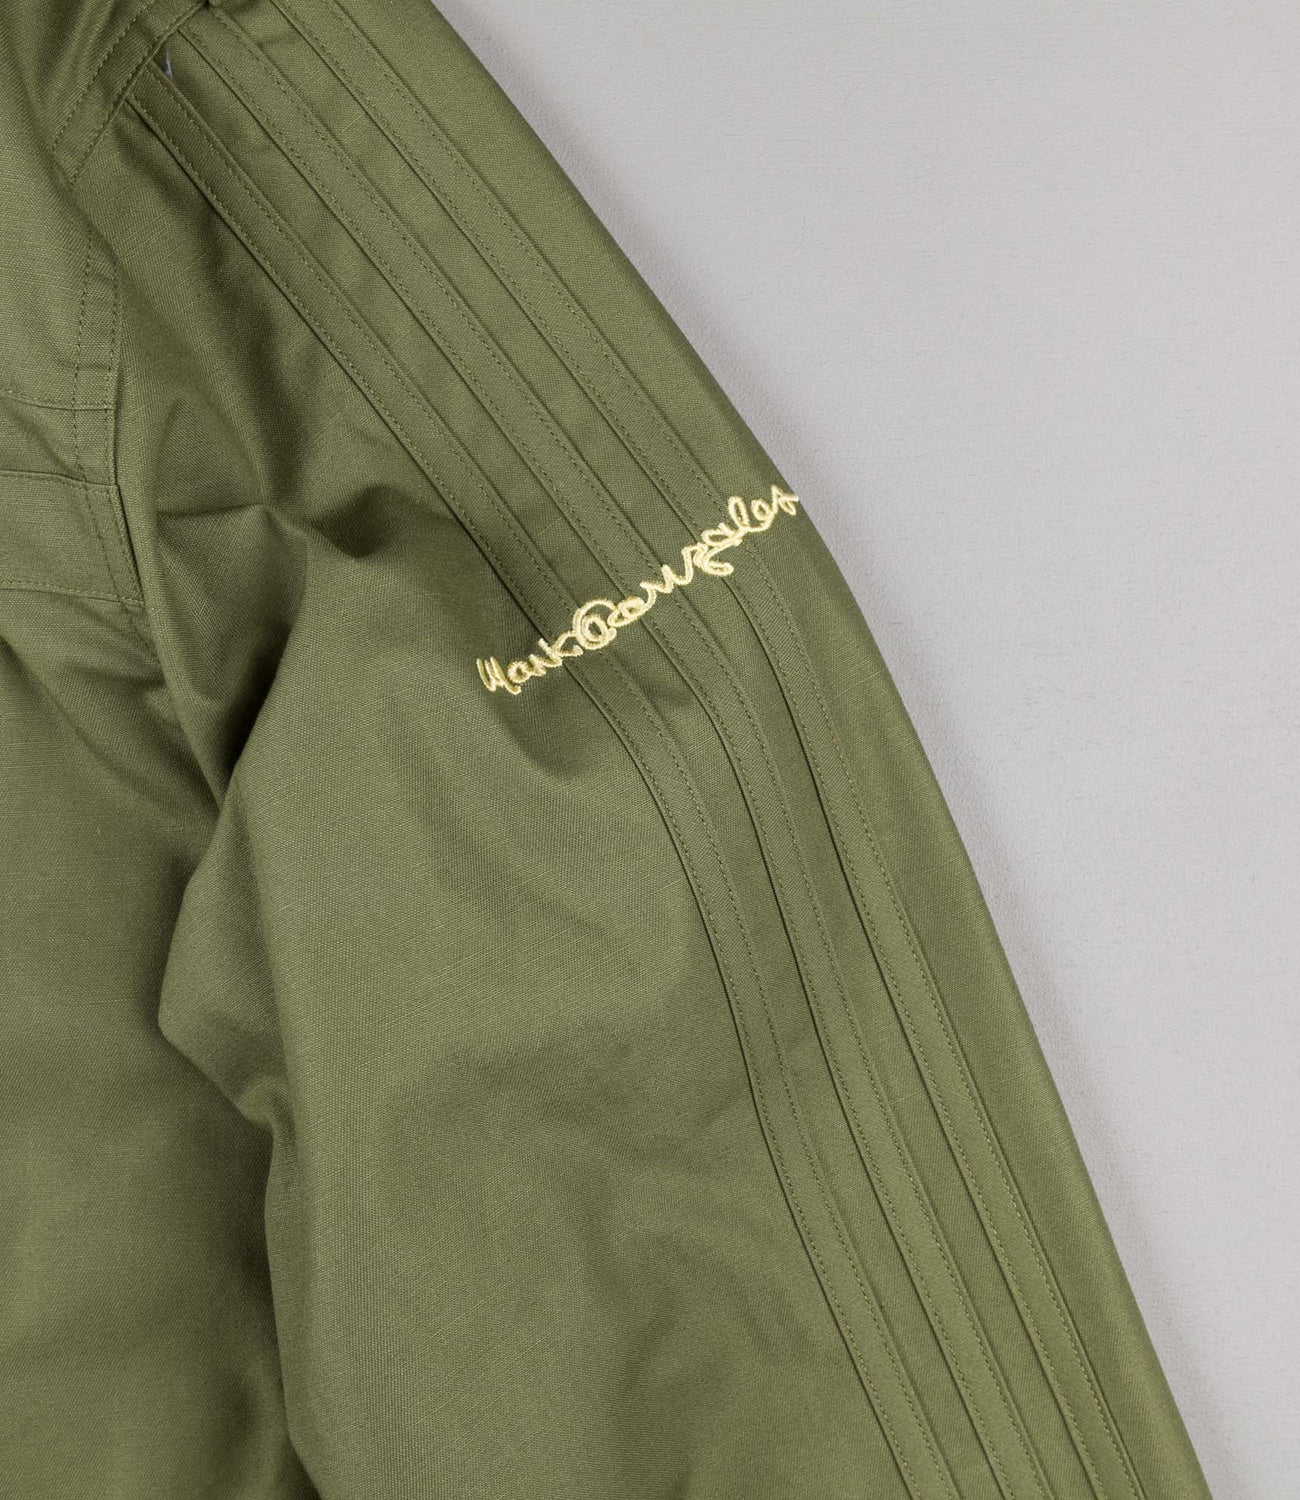 Buy Adidas Originals By Alexander Wang Parley Work Shirt - Focus Olive At  30% Off | Editorialist